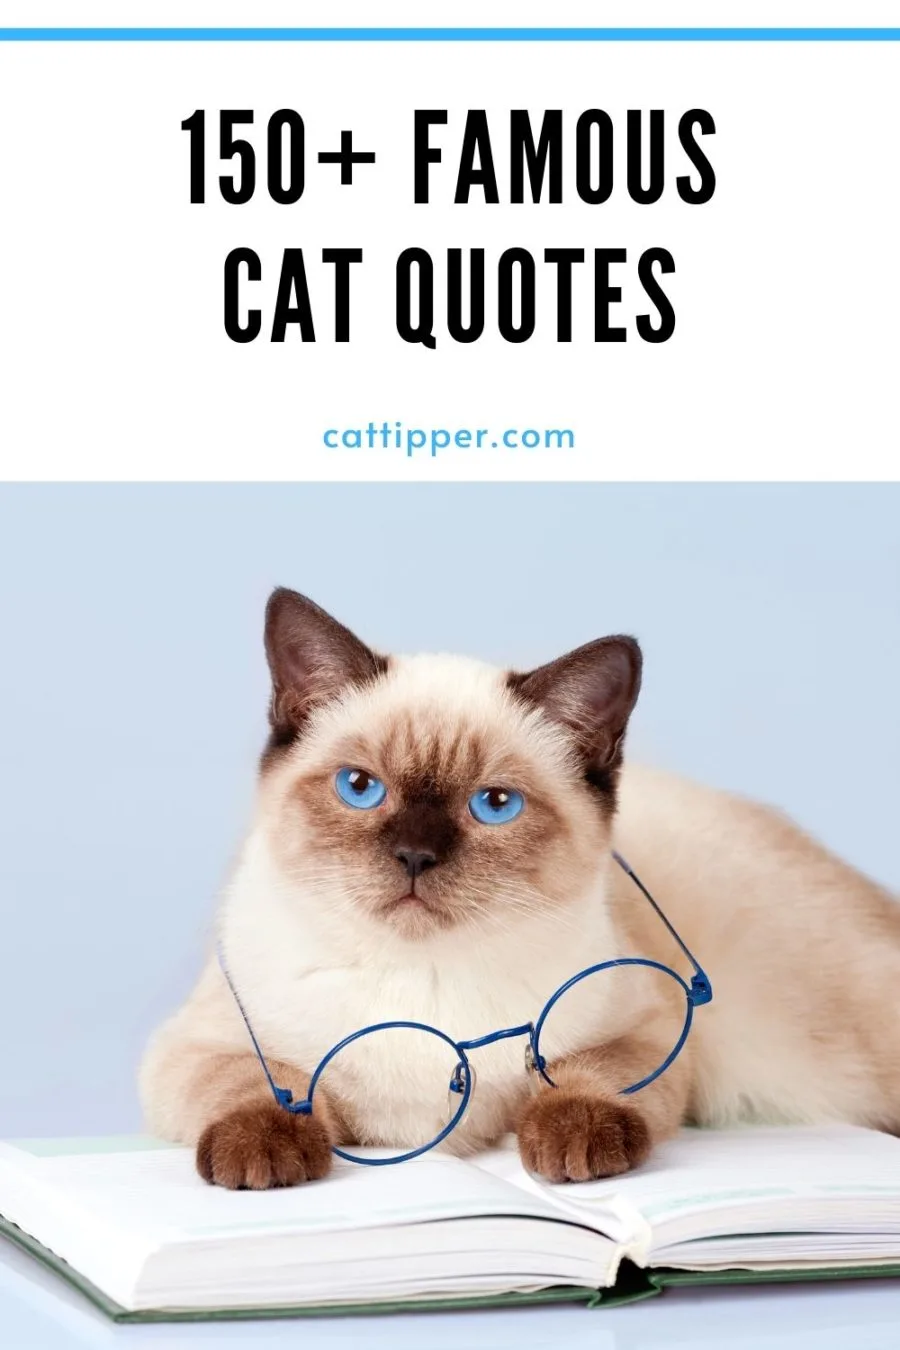 150 cat quotes, kitten quotes and funny cat quotes